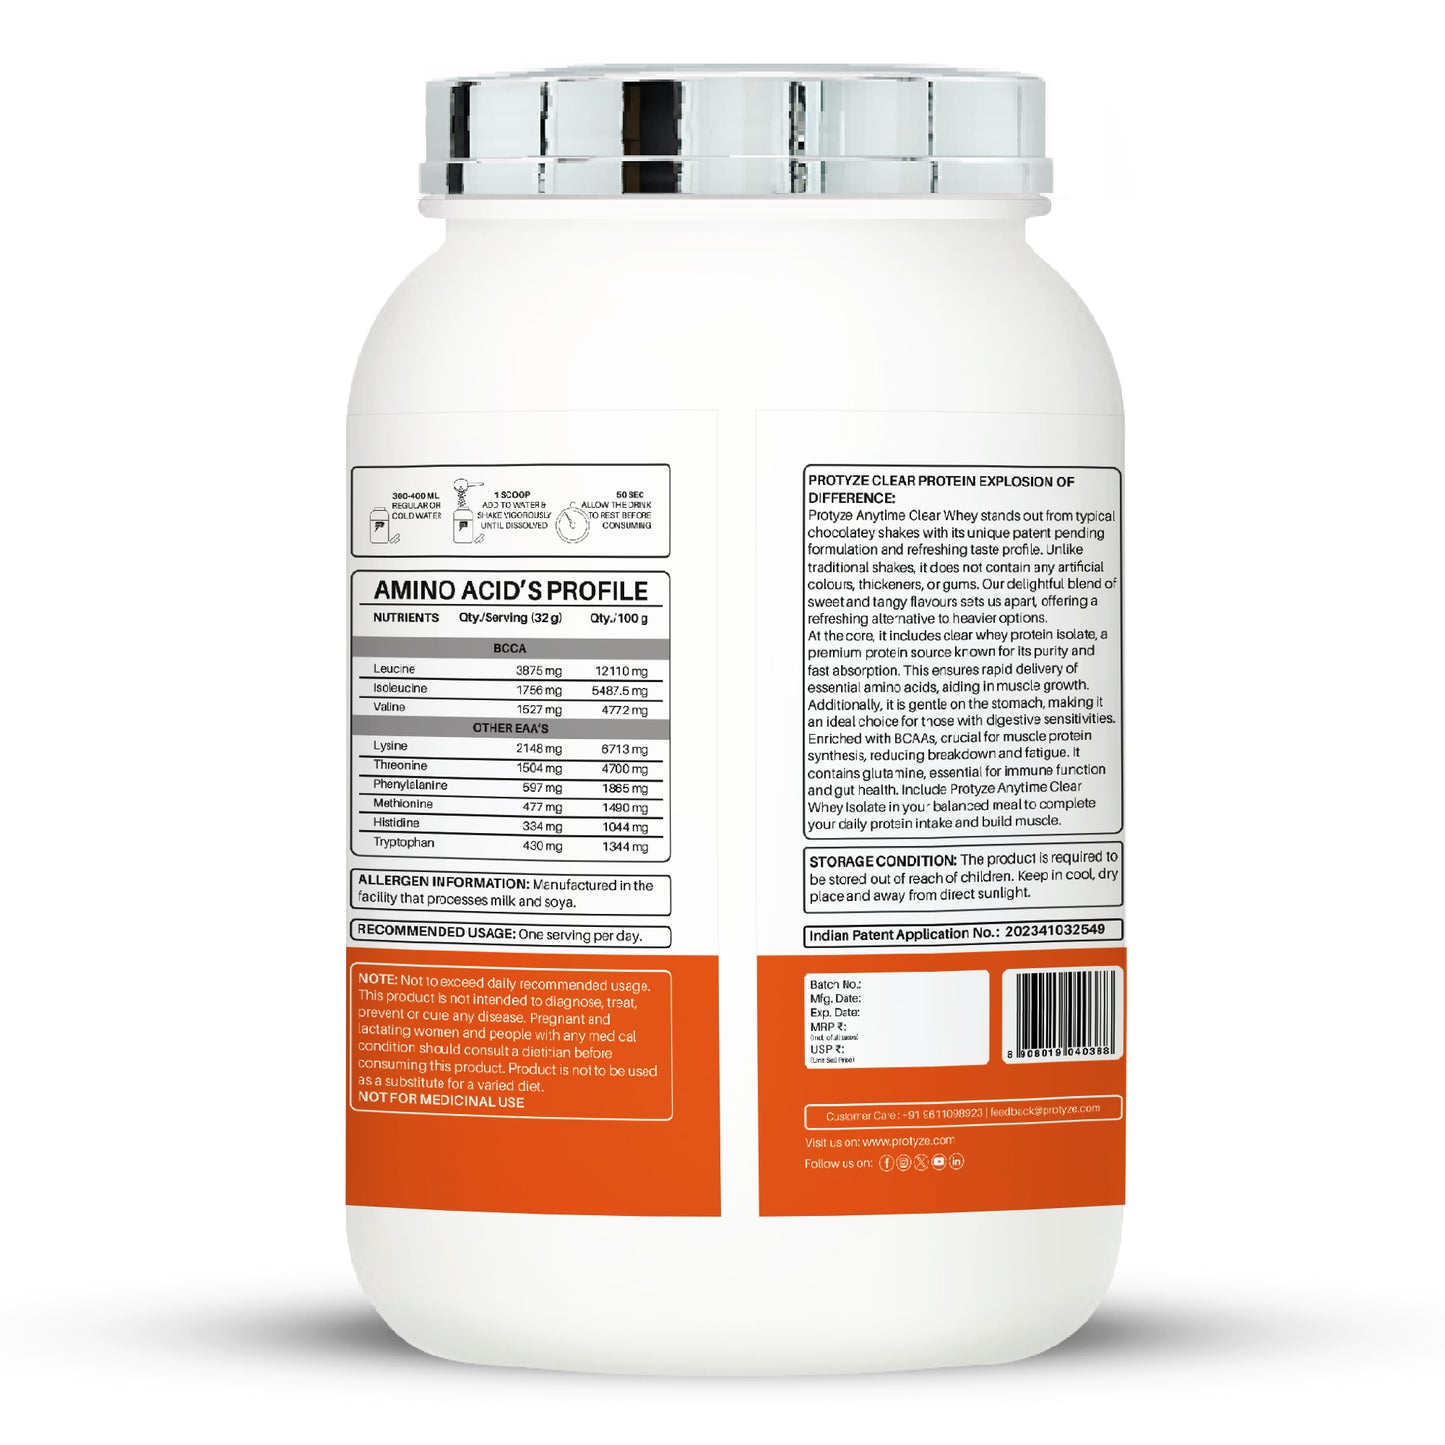 Protyze Anytime Clear Whey Isolate, Orange Squash (30 Servings)